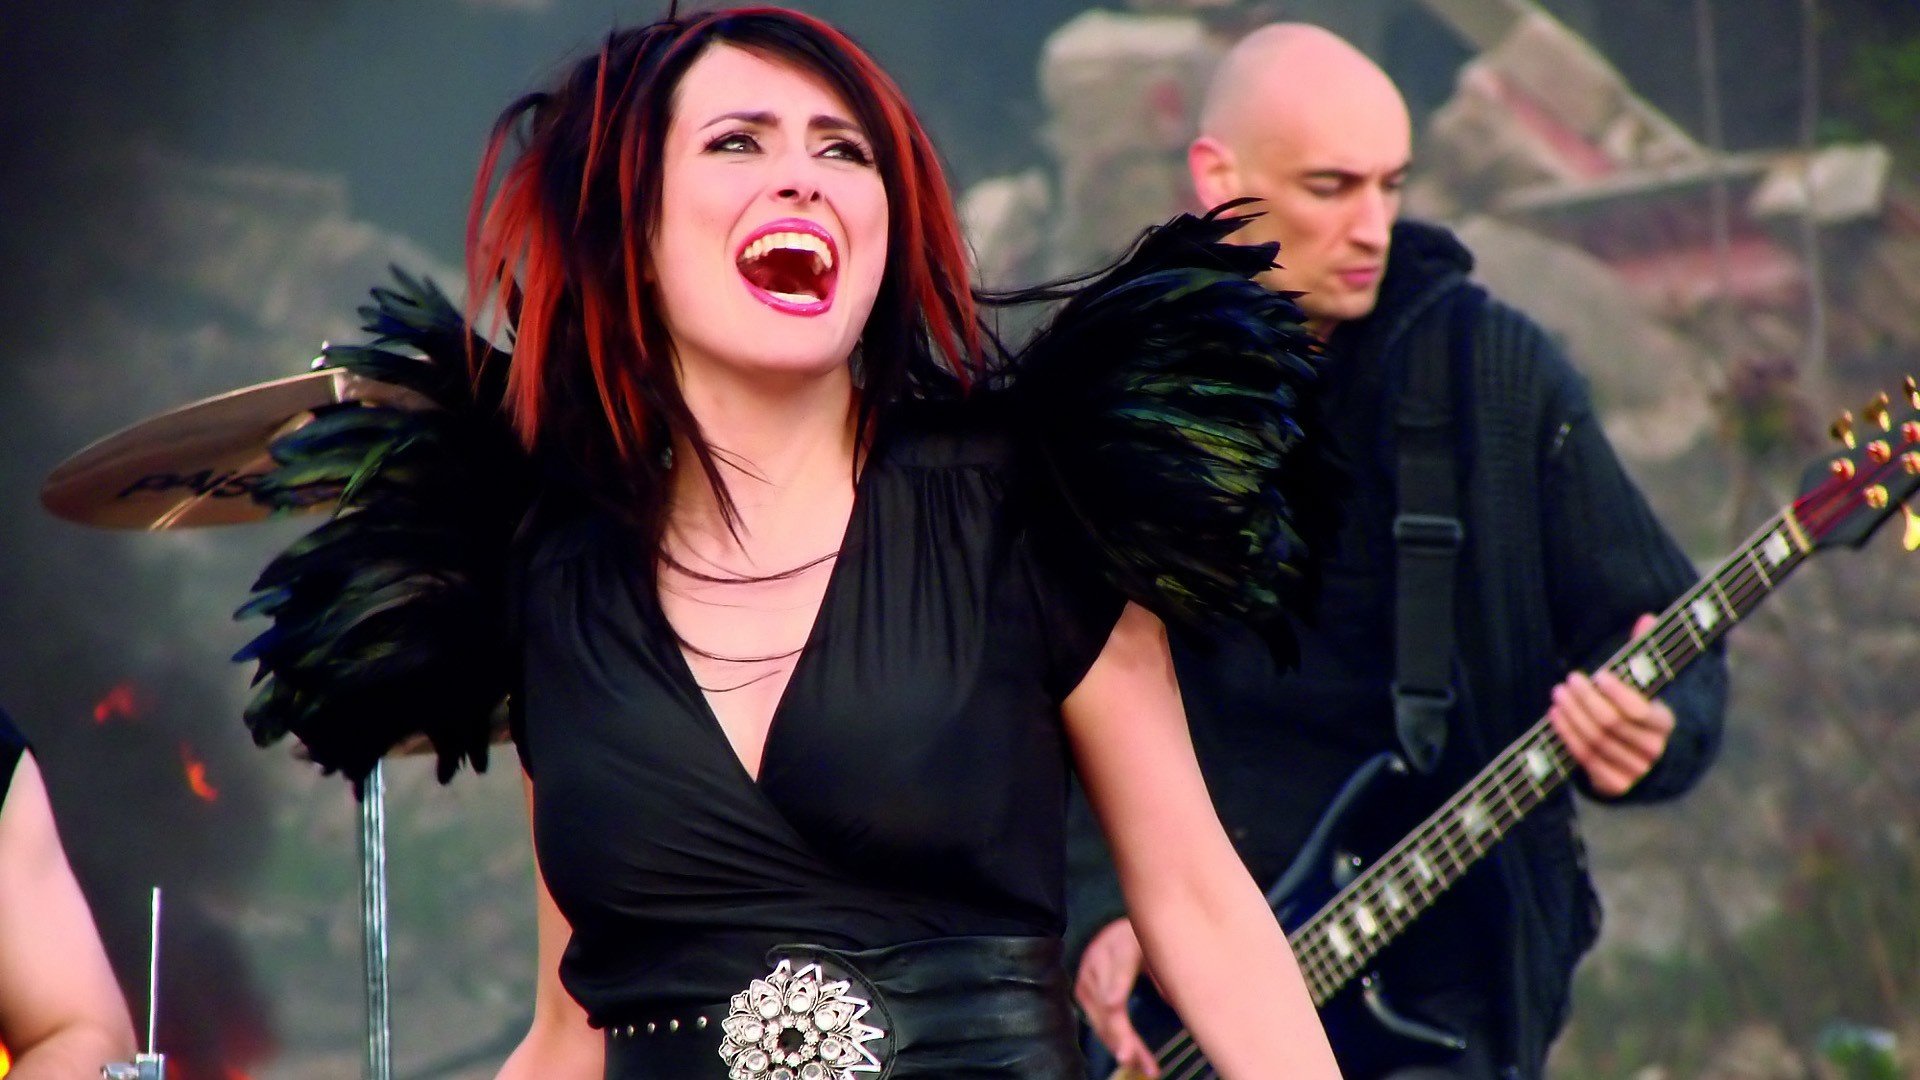 Awesome Within Temptation free background ID:168976 for hd 1080p computer